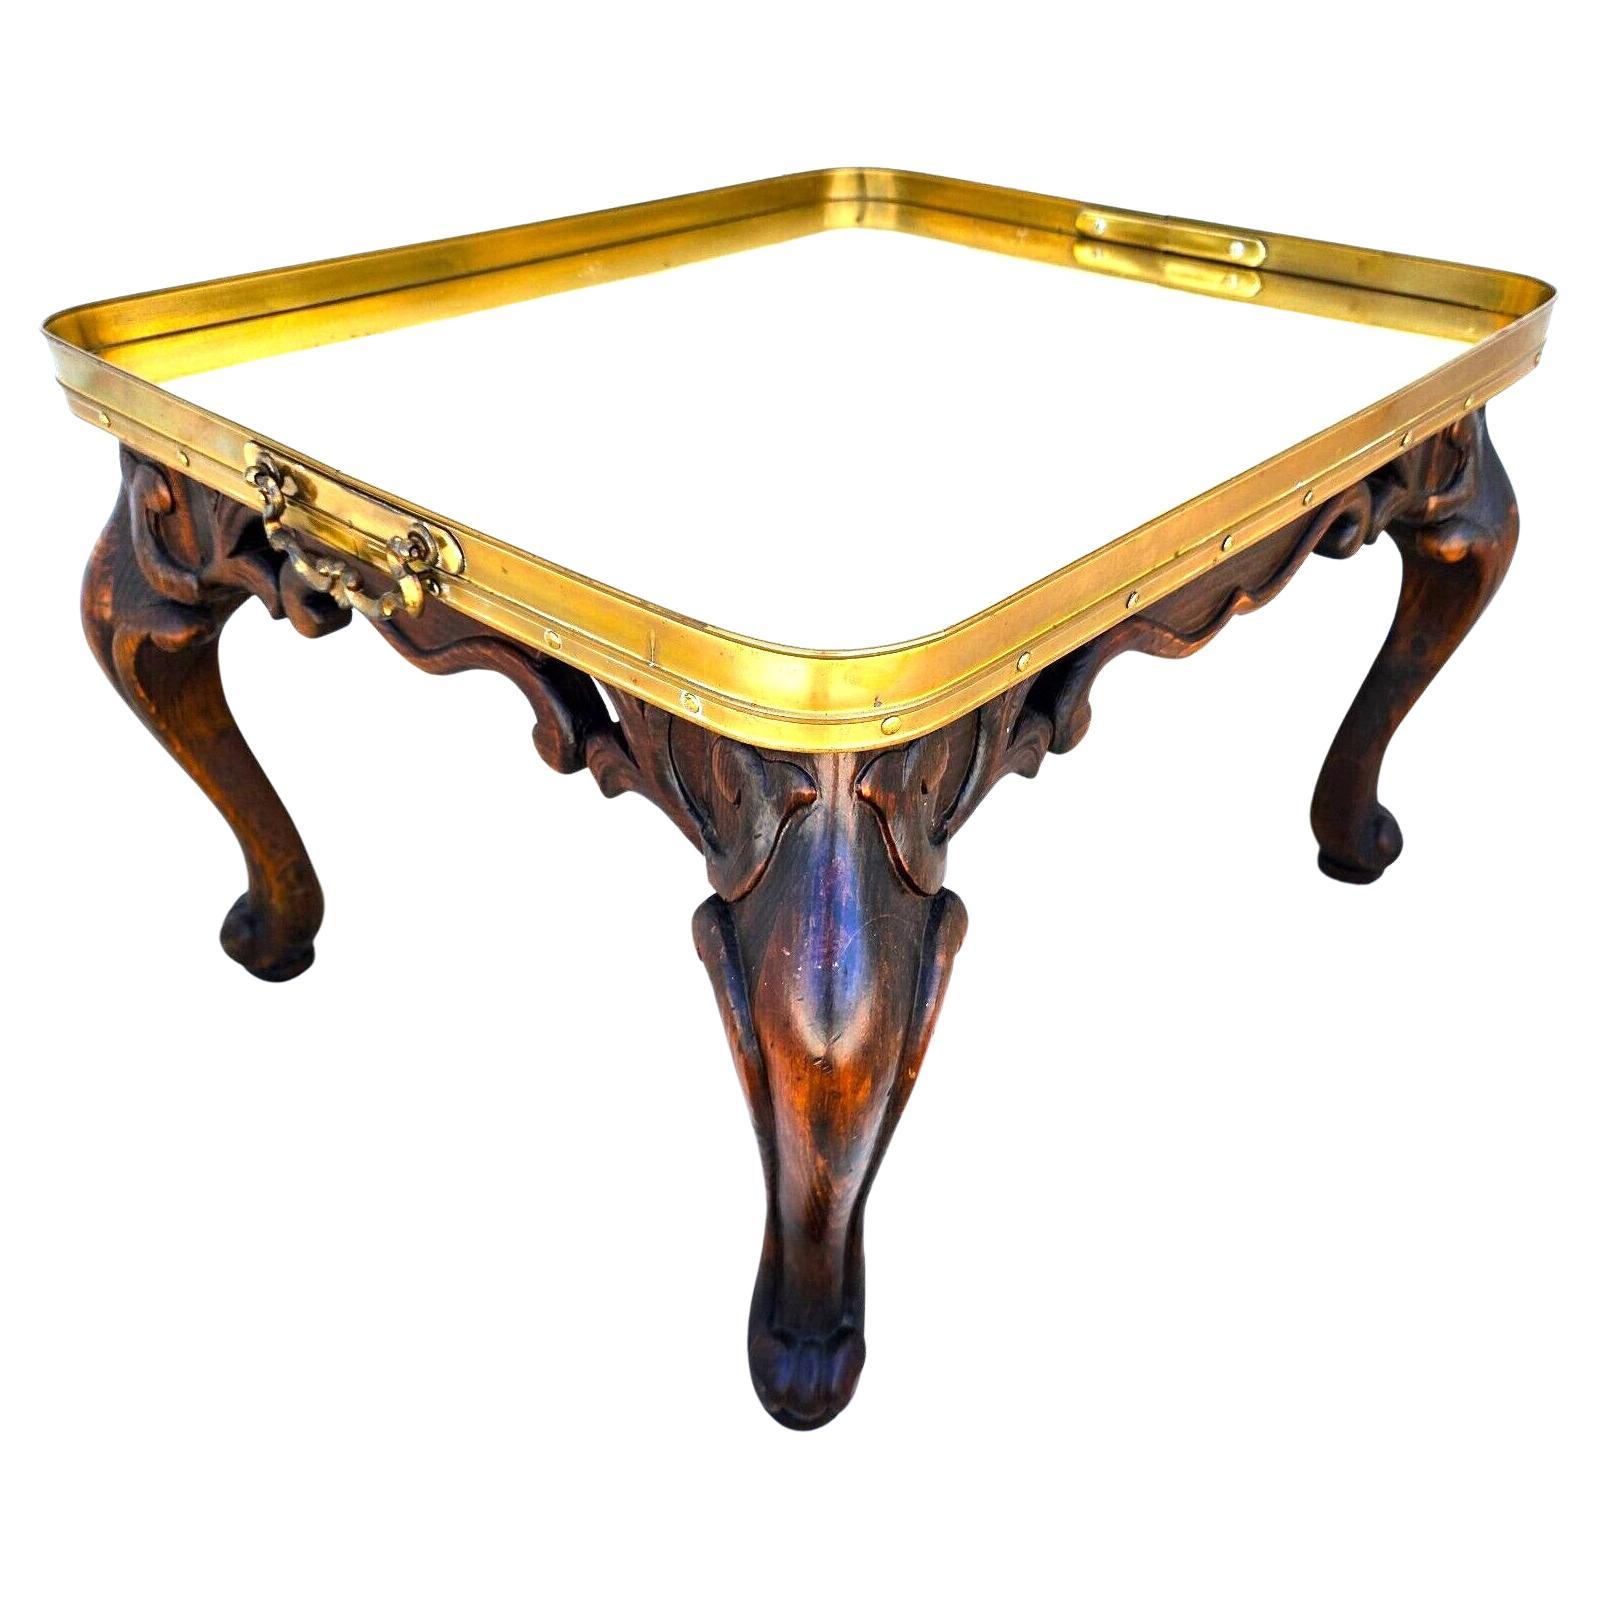 Brass Tray Table Midcentury